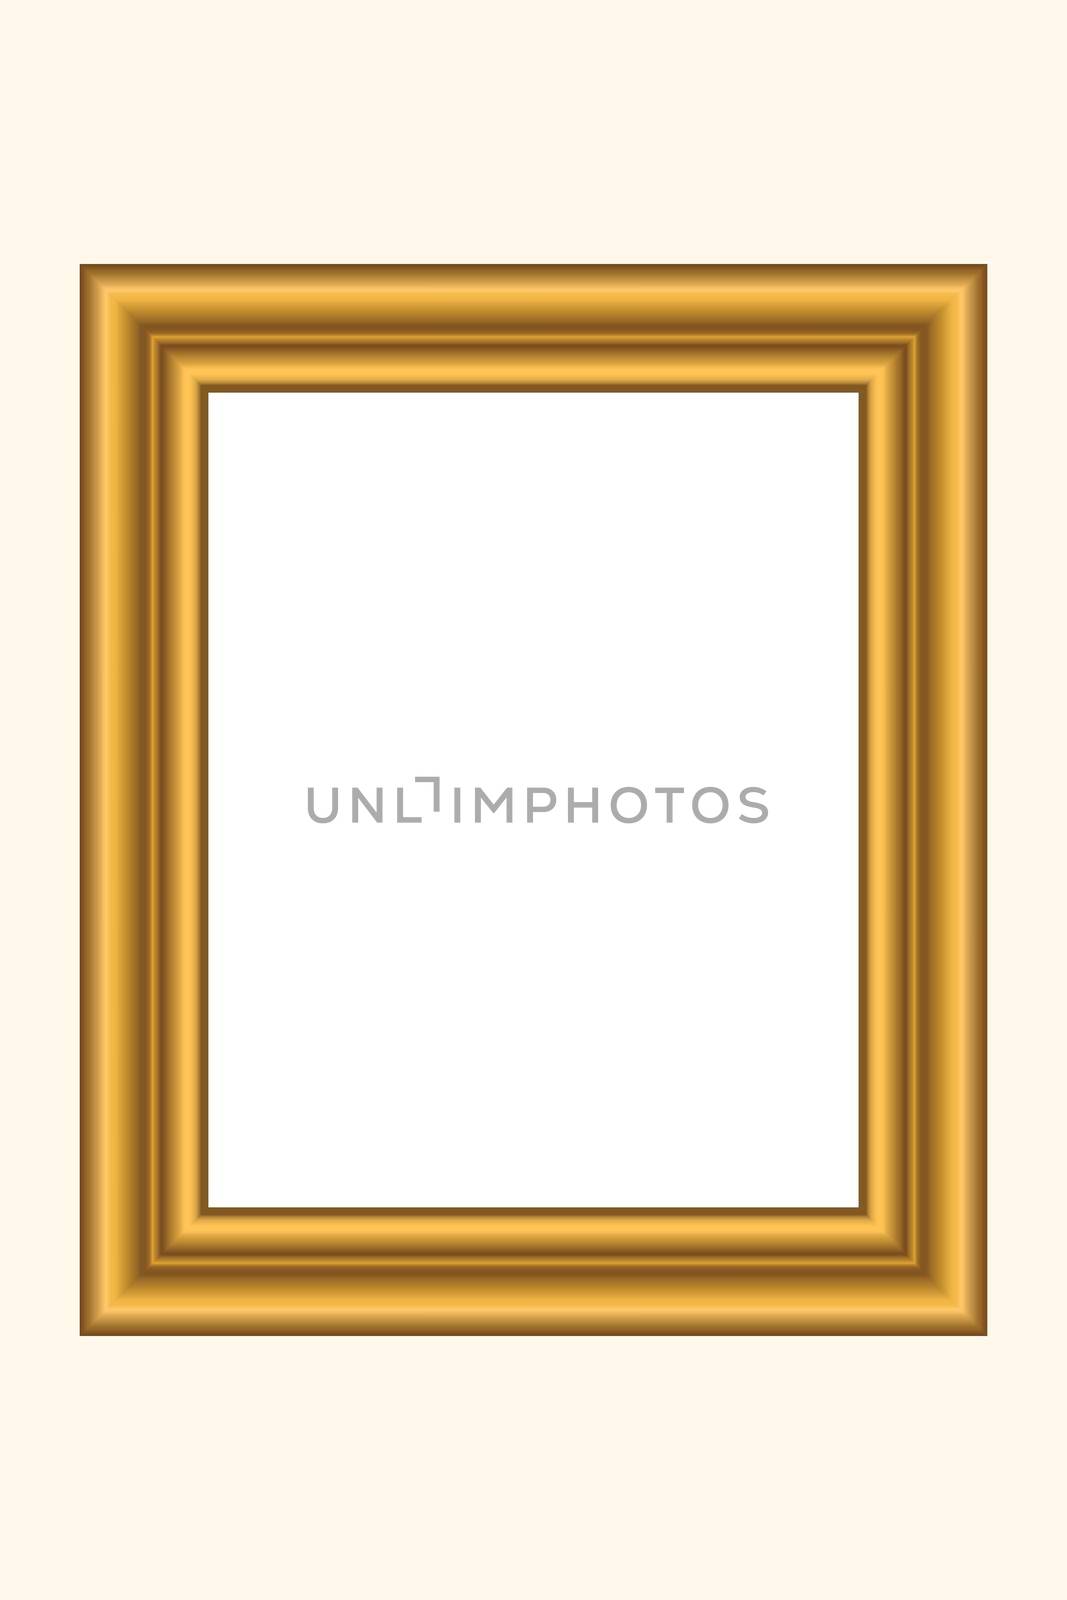 Squared golden vintage wooden frame for your design. Vintage cover. Place for text. Vintage antique gold beautiful rectangular frames for paintings or photographs. Template vector illustration by allaku